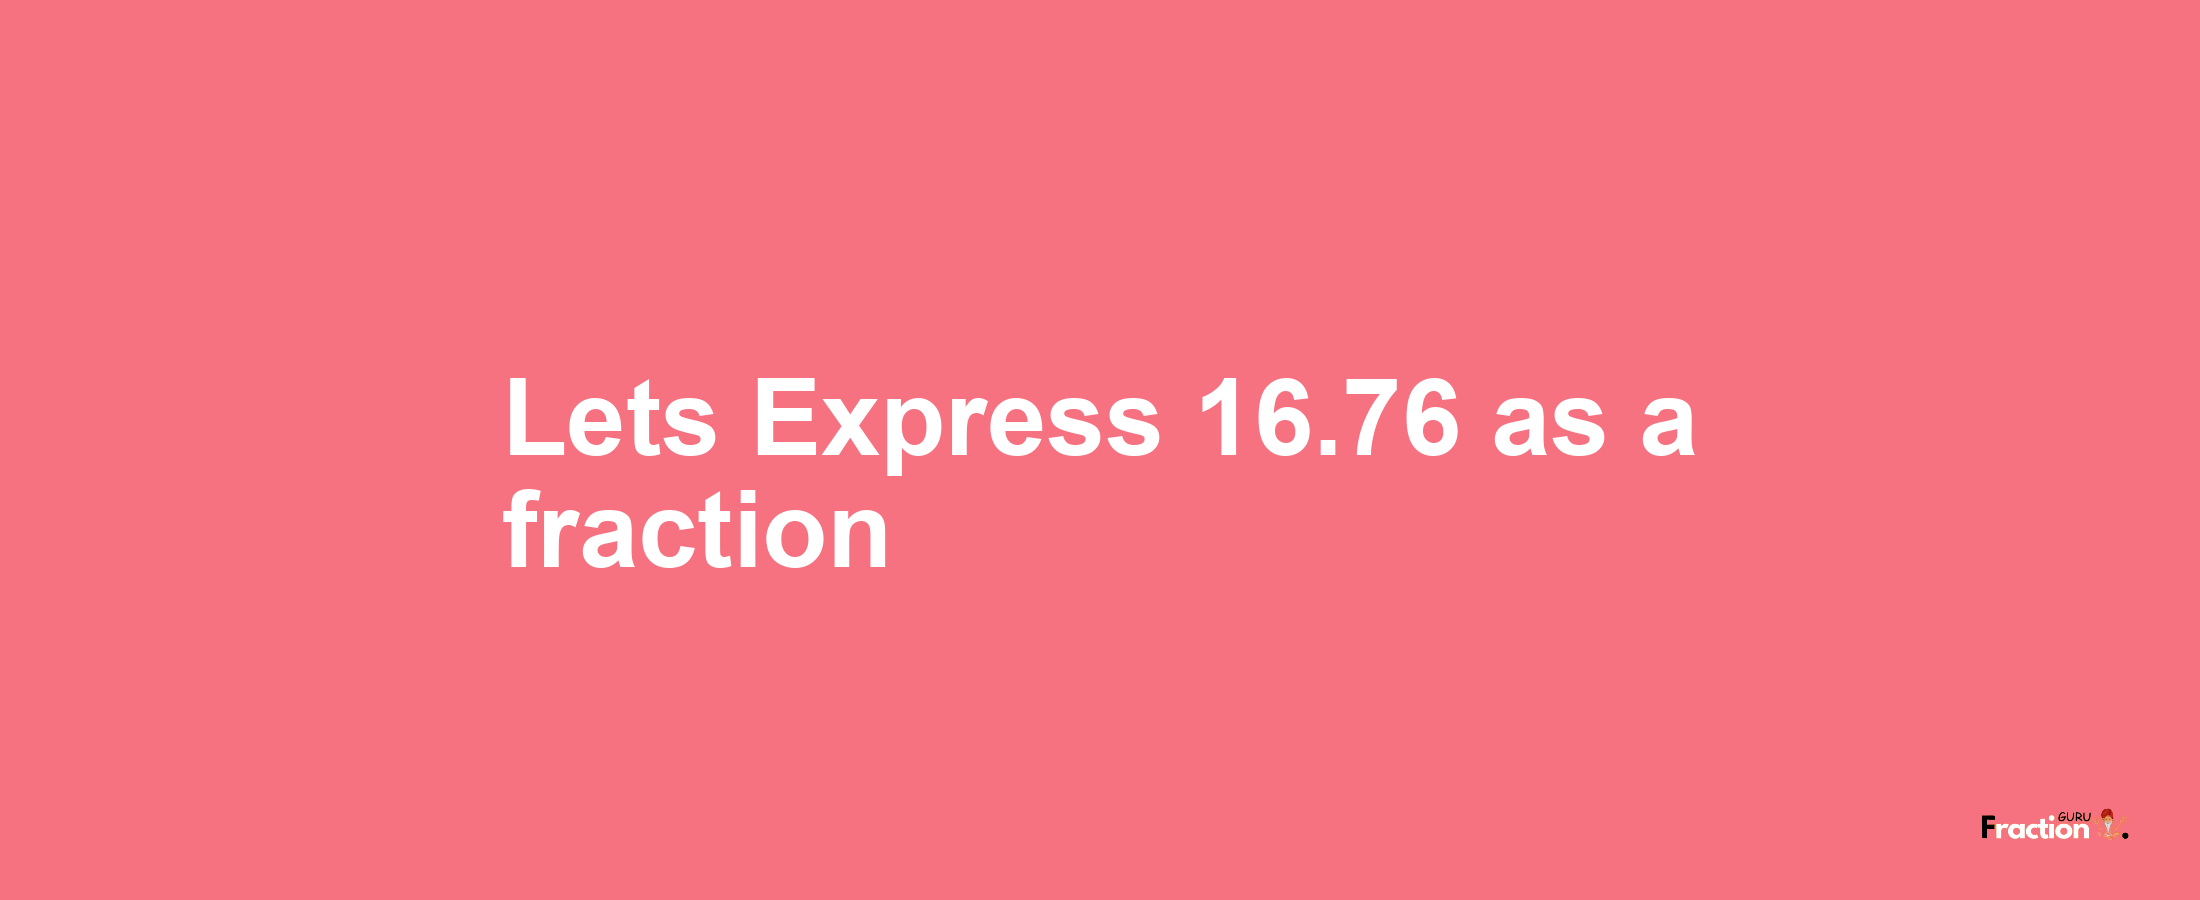 Lets Express 16.76 as afraction